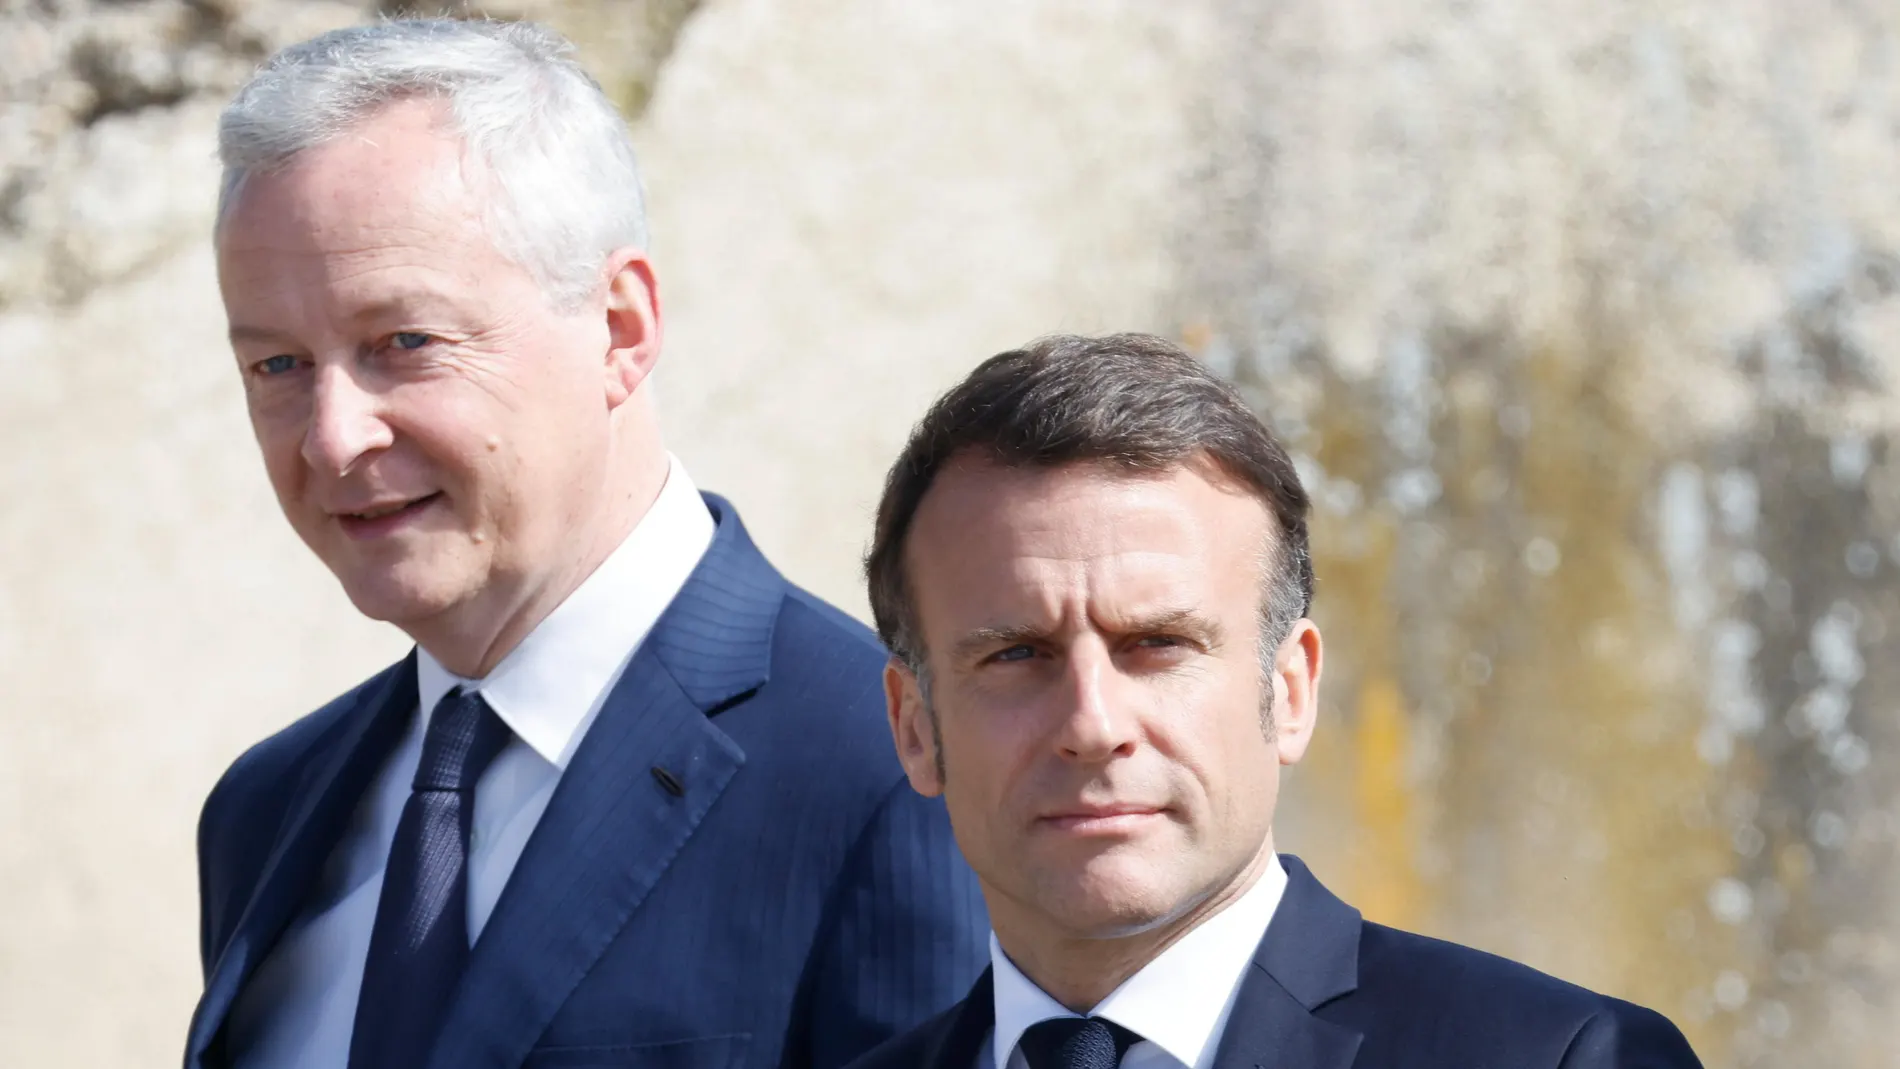 Bergerac (France), 11/04/2024.- France's President Emmanuel Macron (R) and France's Minister for Economy and Finances Bruno Le Maire (L) walk during at visit to the powders and explosives company Eurenco plant in Bergerac, southwestern France, 11 April 2024. (Francia) EFE/EPA/LUDOVIC MARIN / POOL MAXPPP OUT